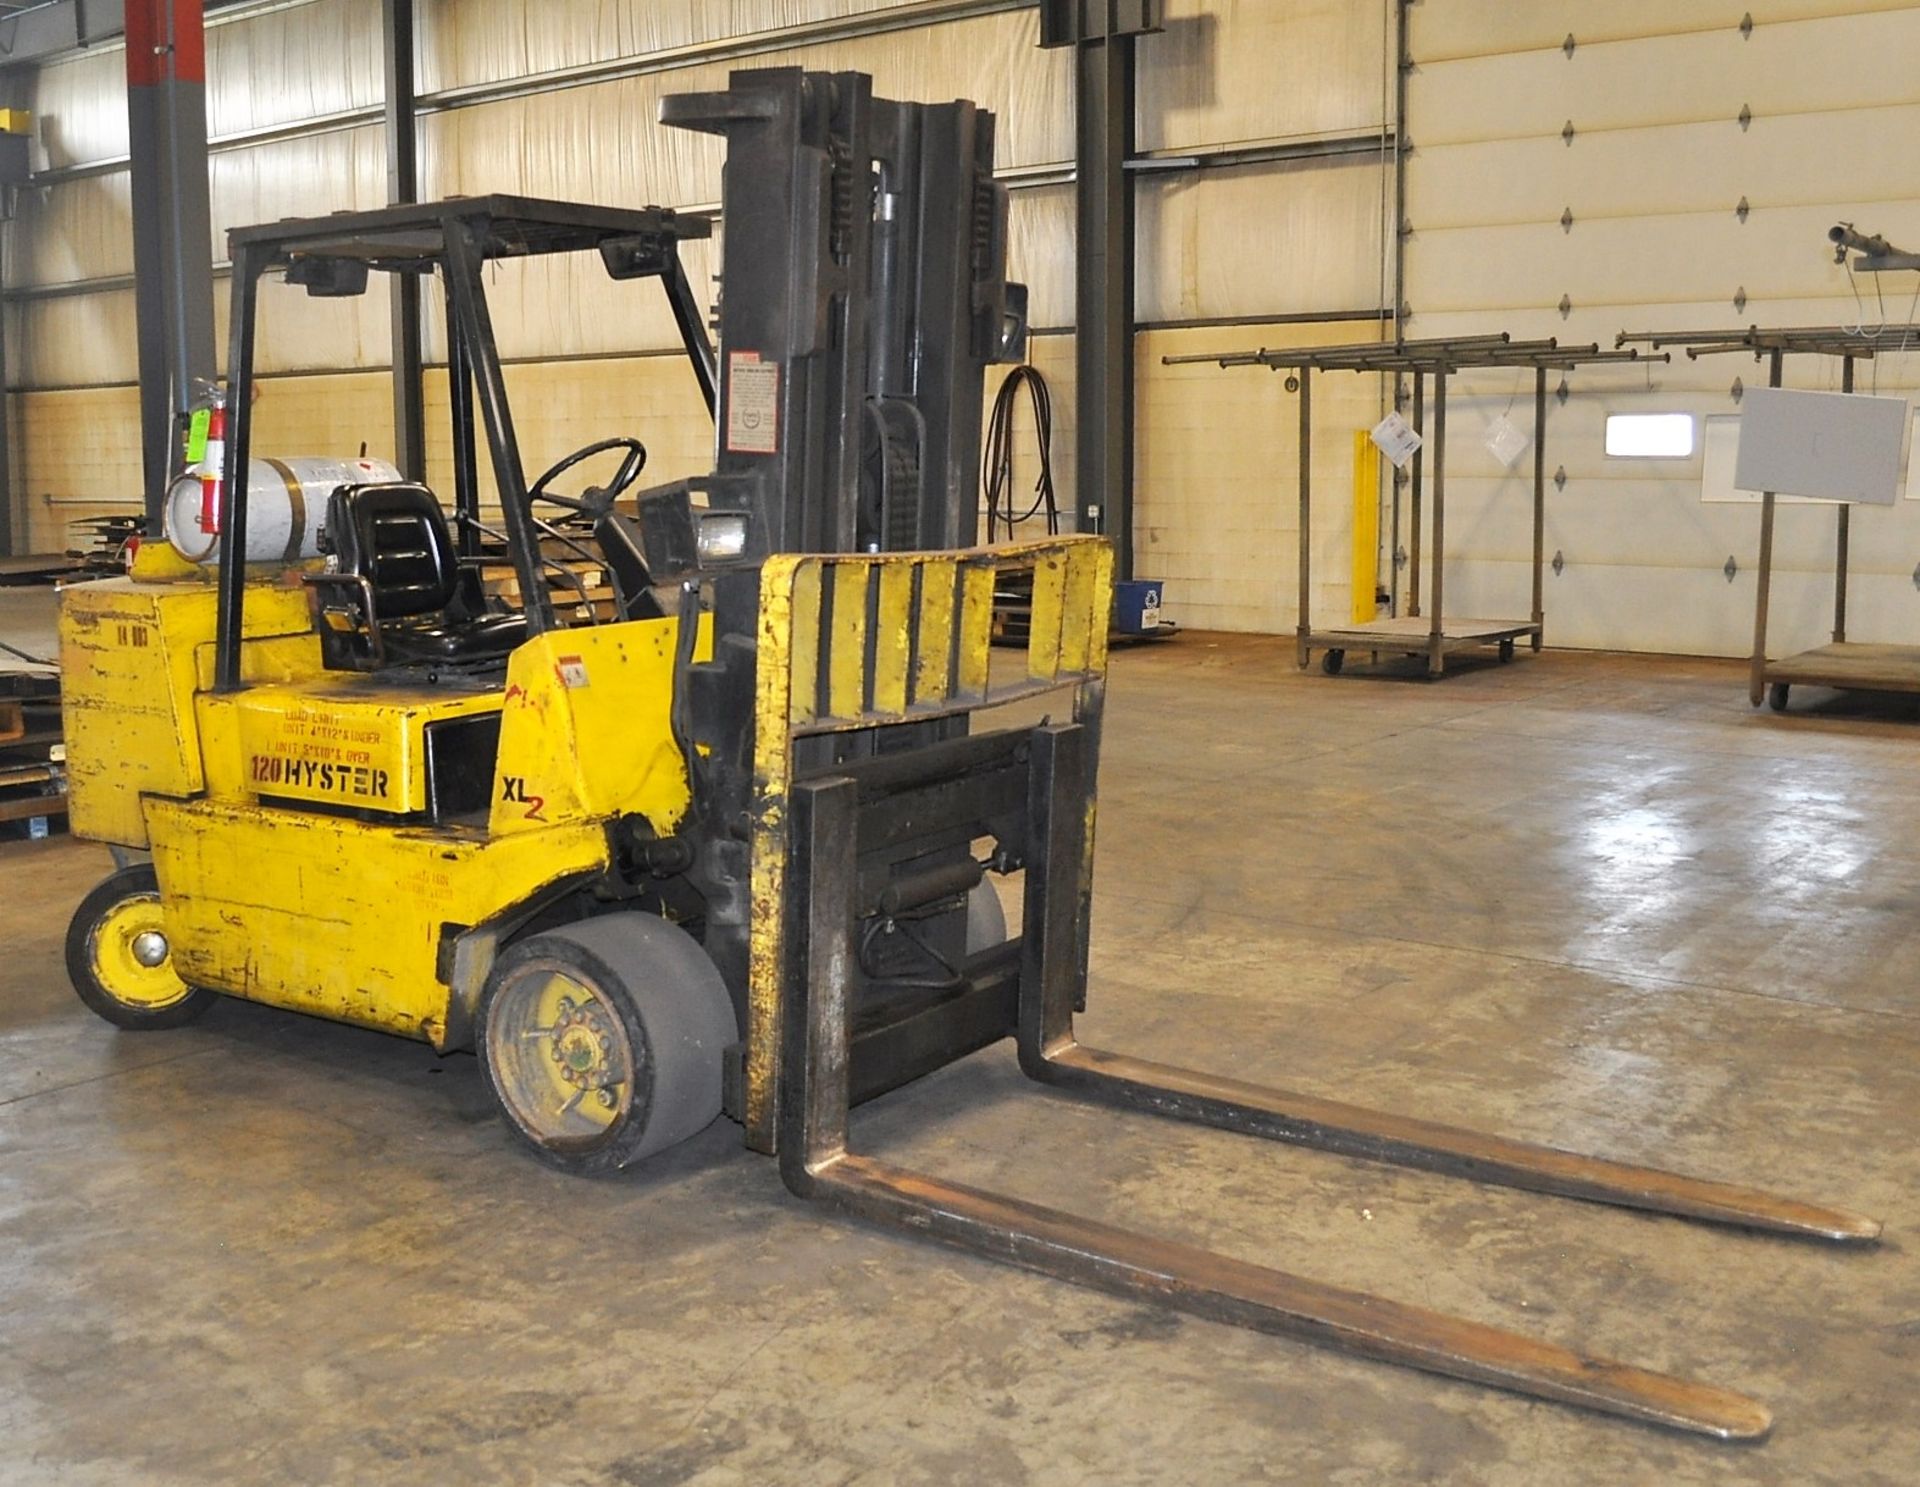 HYSTER MDL. S120XLS 11,700# CAPACITY PROPANE FORKLIFT TRUCK, WITH 184" LIFT, SOLID TIRES, SIDE - Image 4 of 5